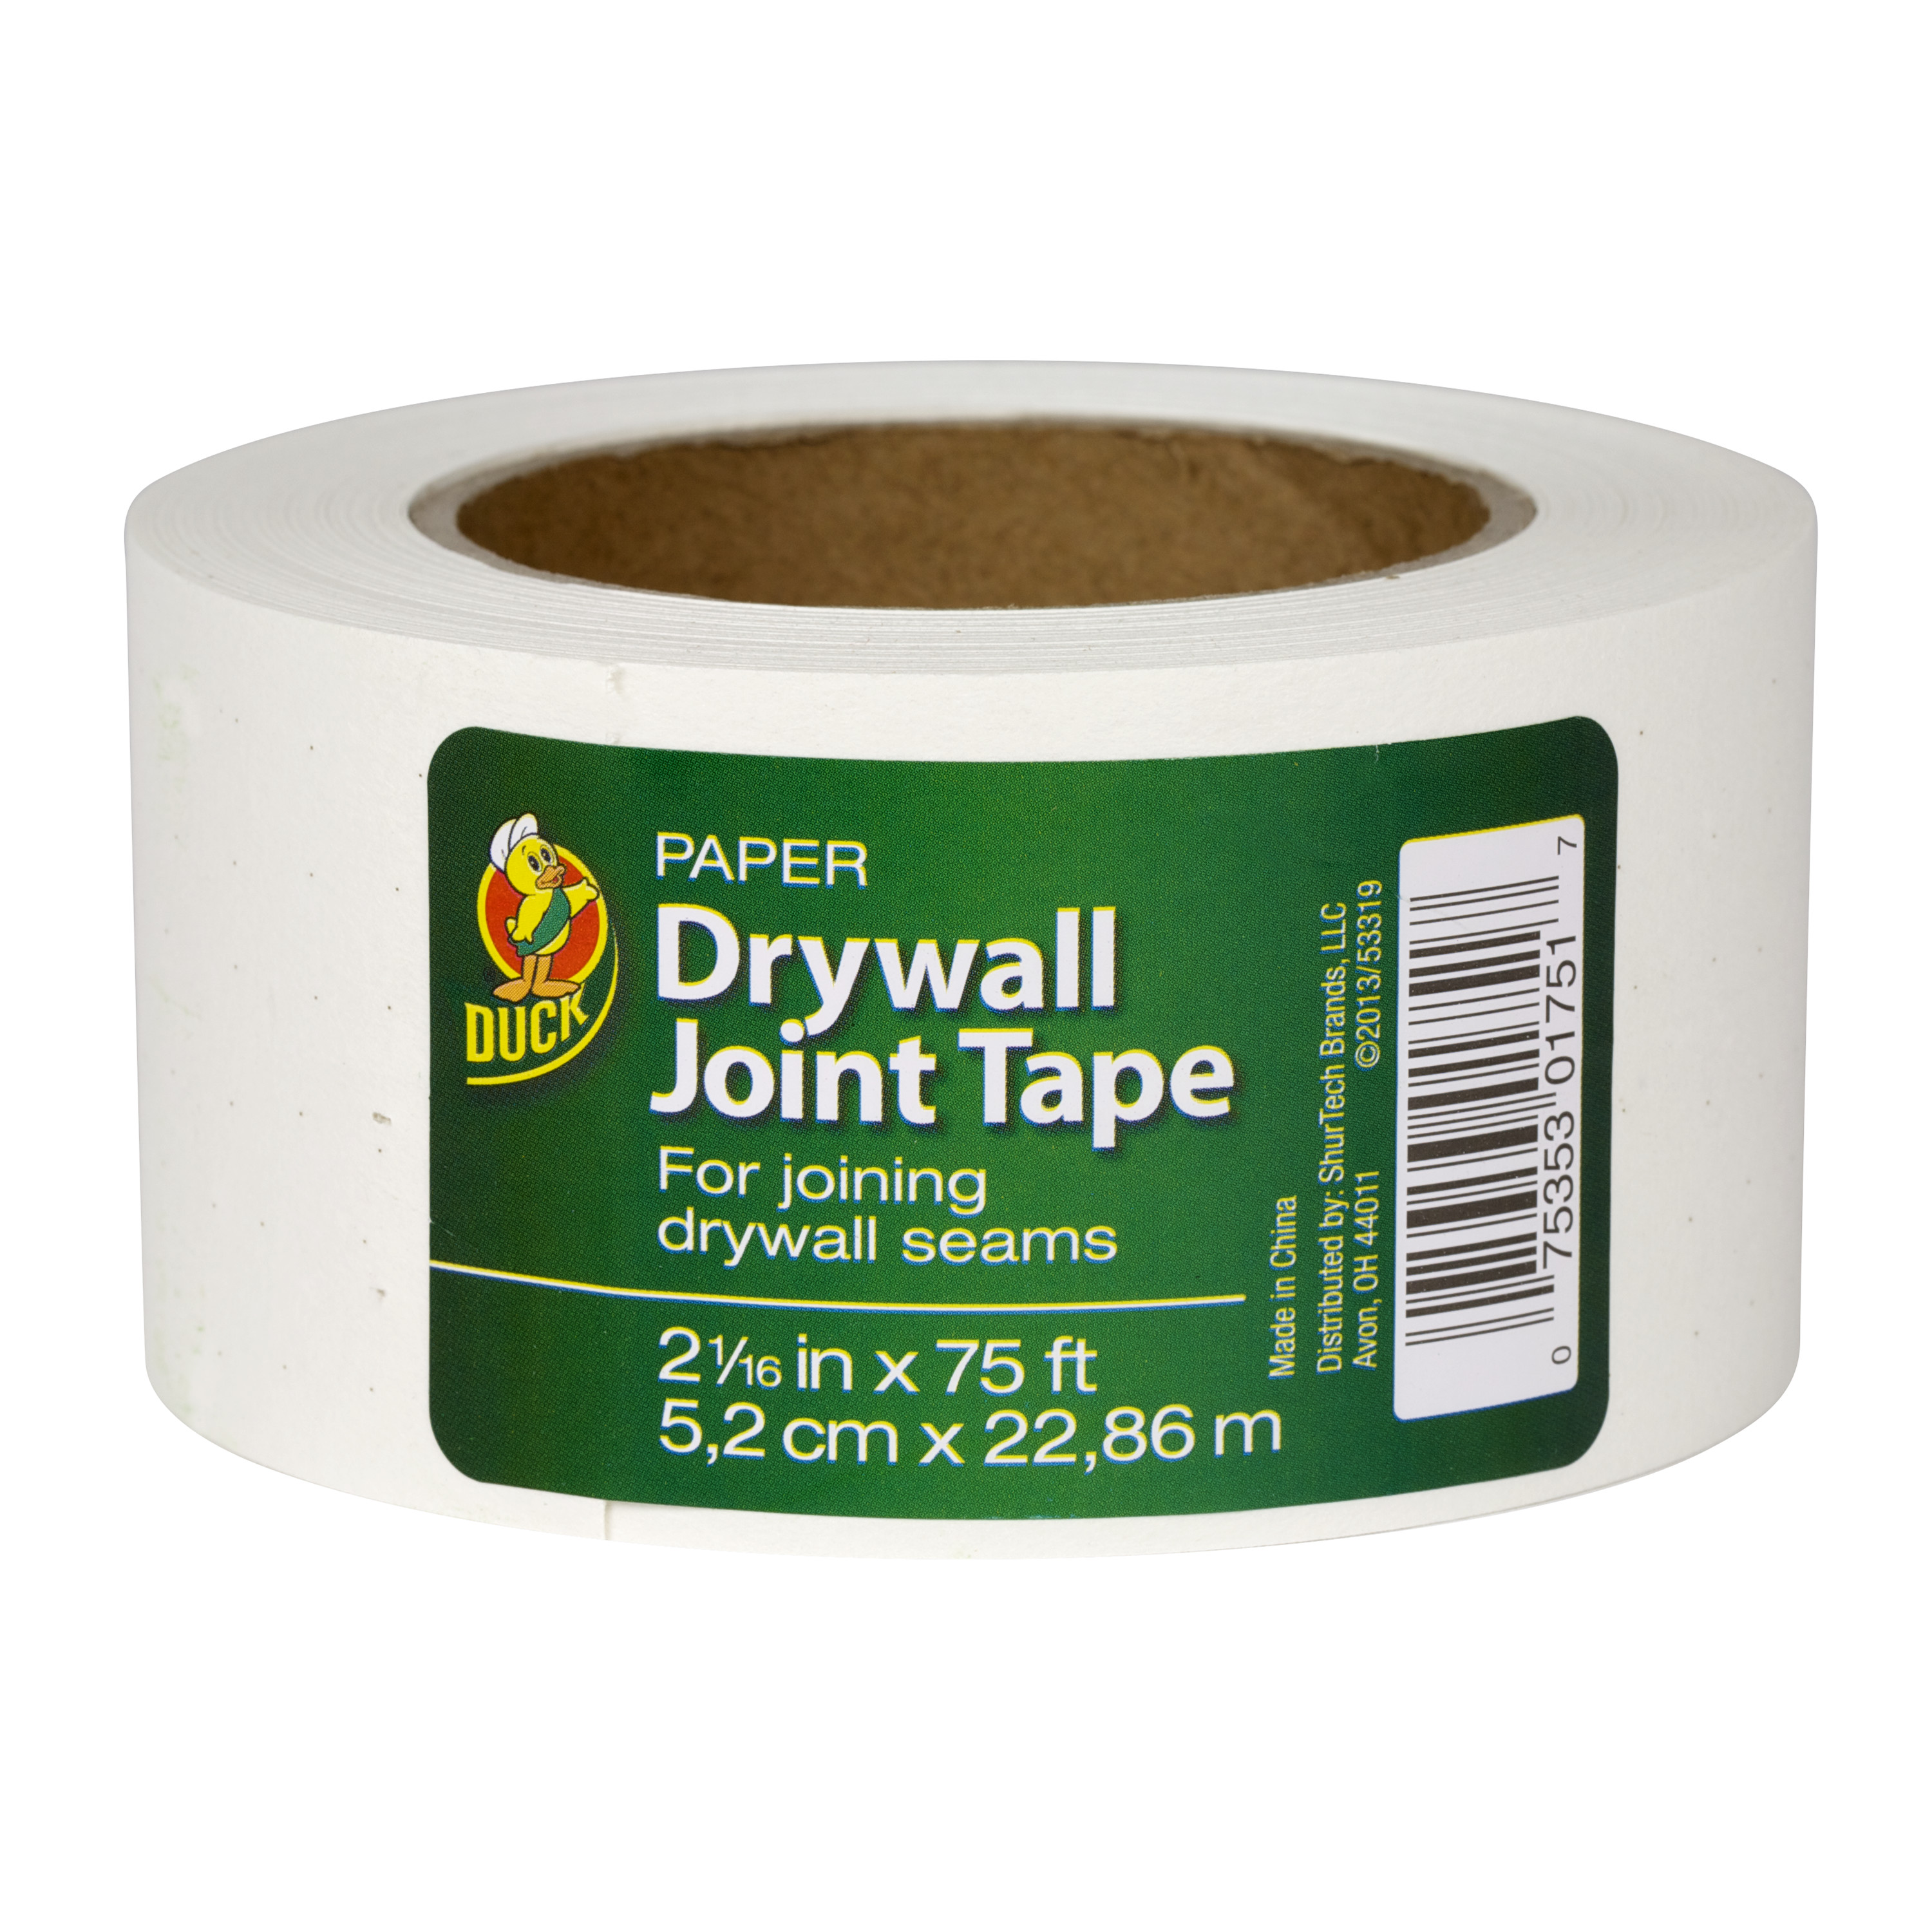 Duck Drywall All Purpose Joint Paper Tape, 2.06 in. x 75 ft., White - image 1 of 10